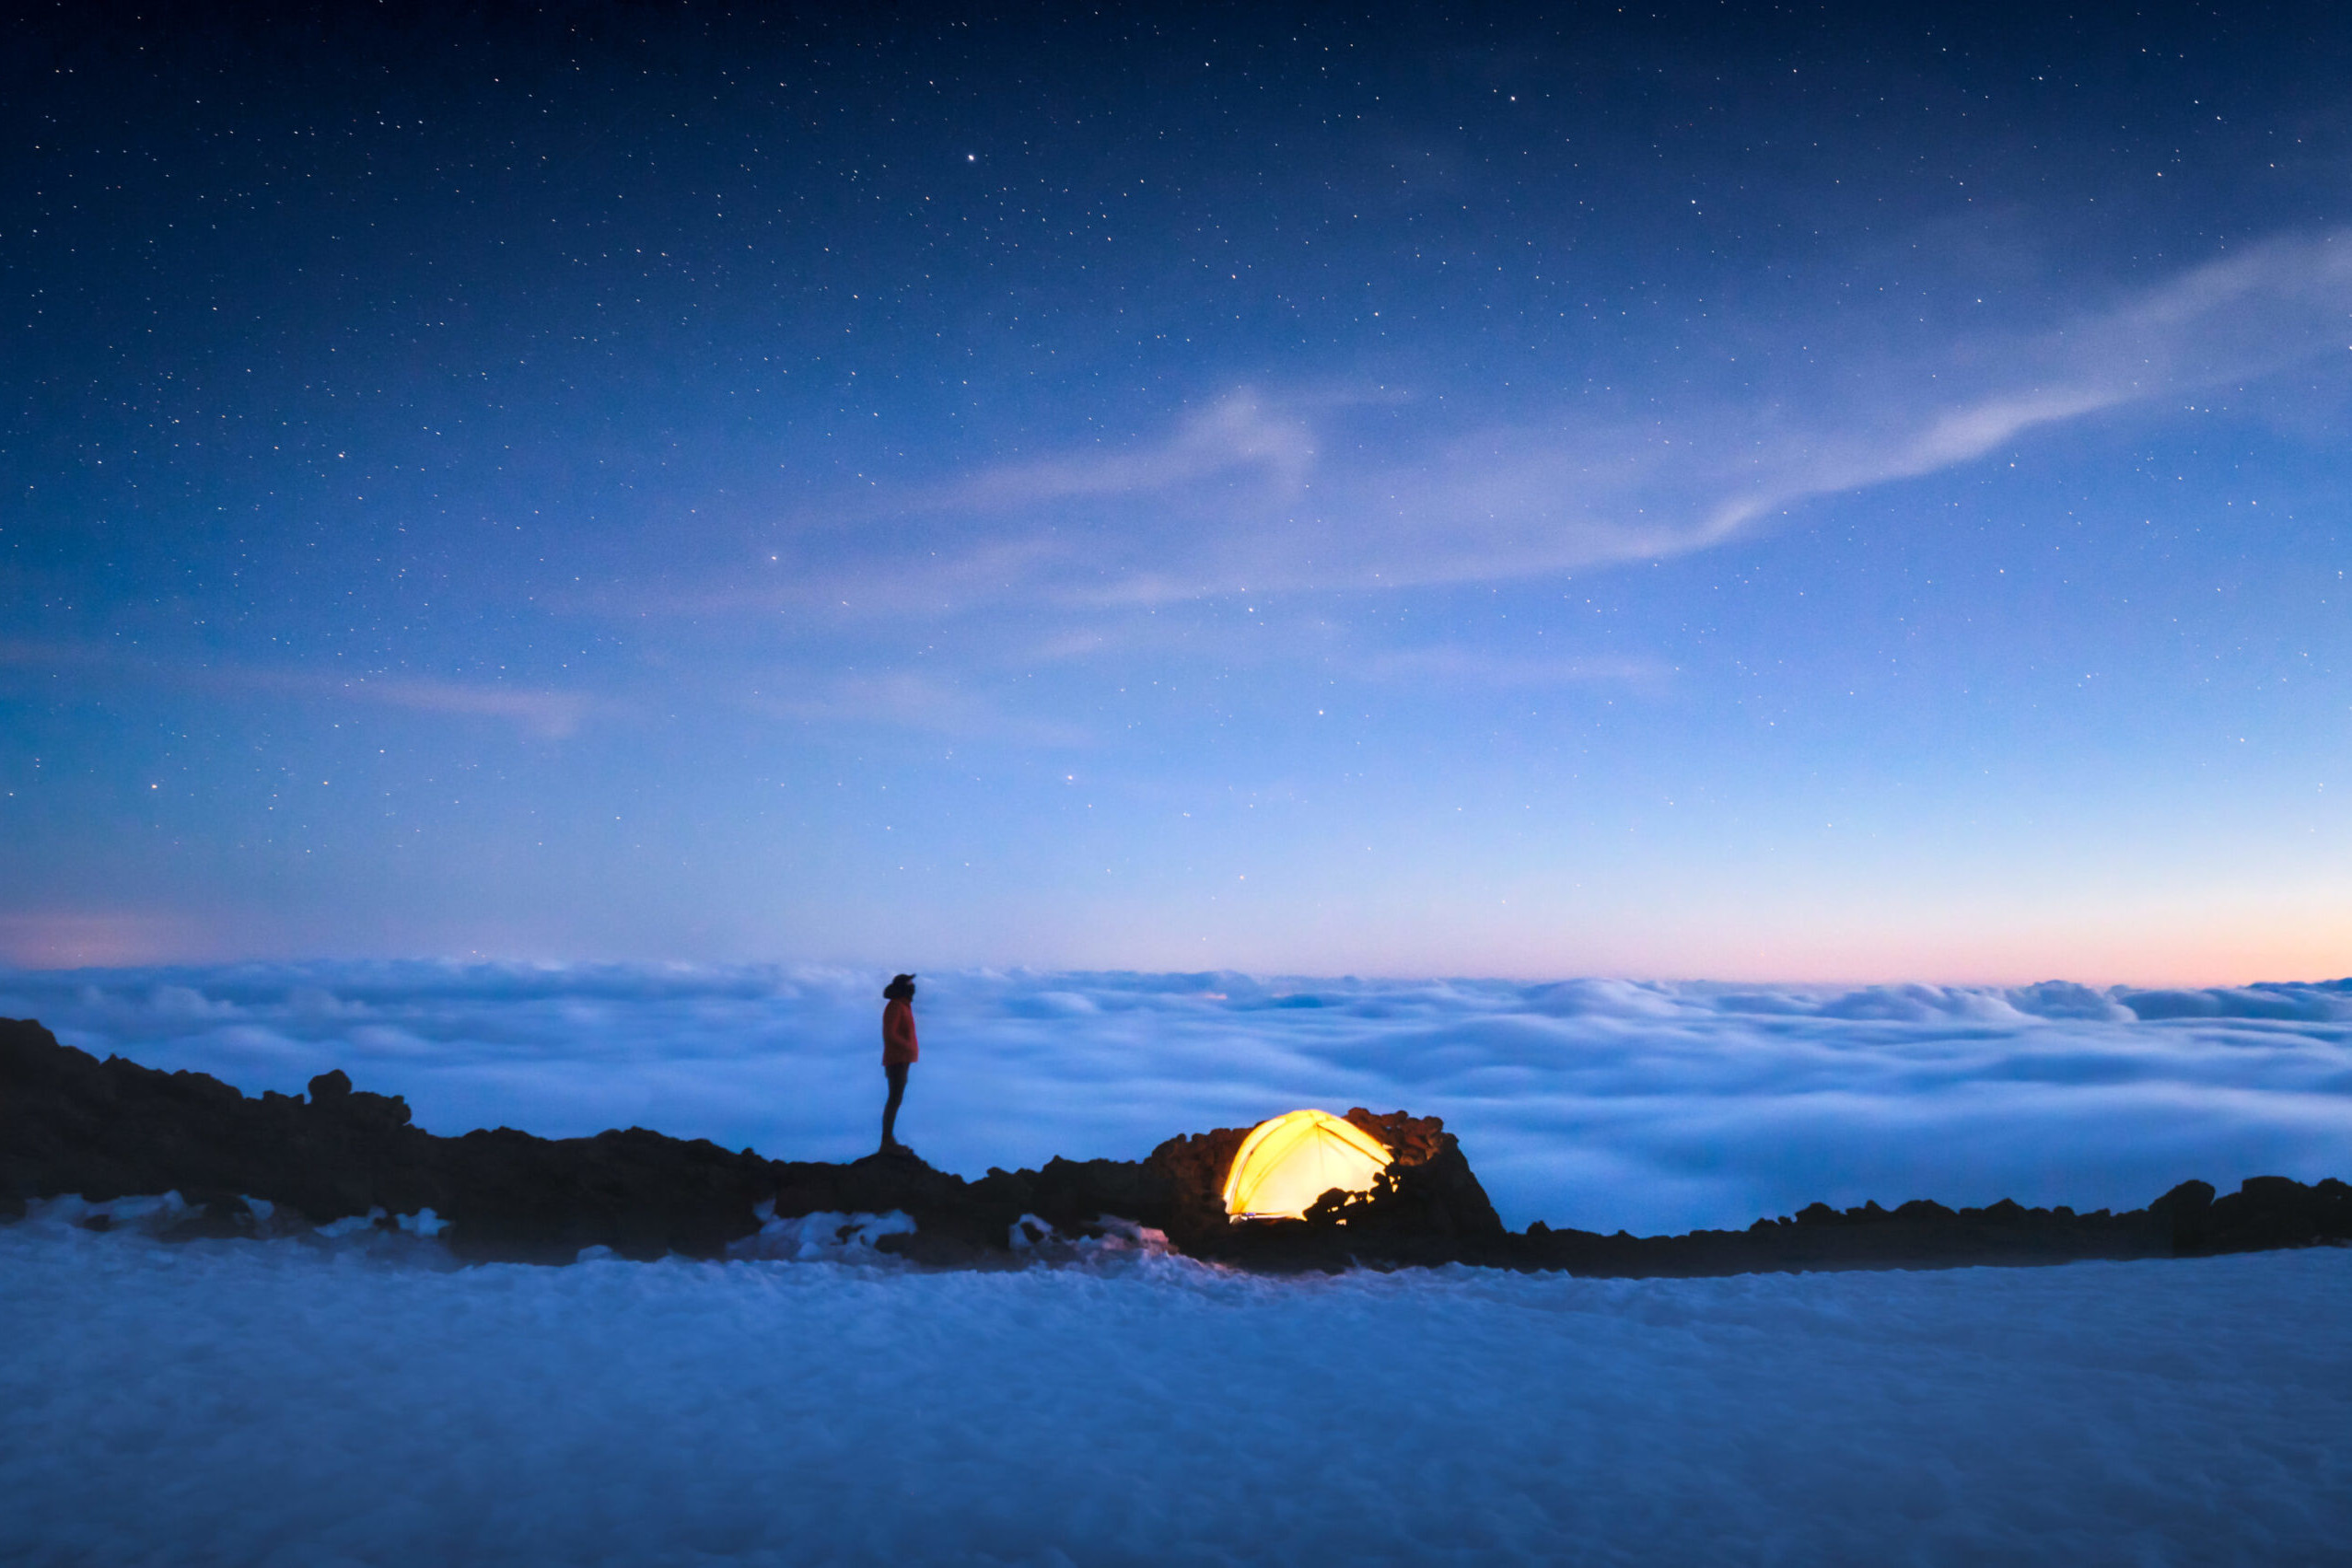 A tent glows yellow under a starry night on the Summit of South Sister mountain in Oregon above the fog. Photo by Taylor Gray Visuals